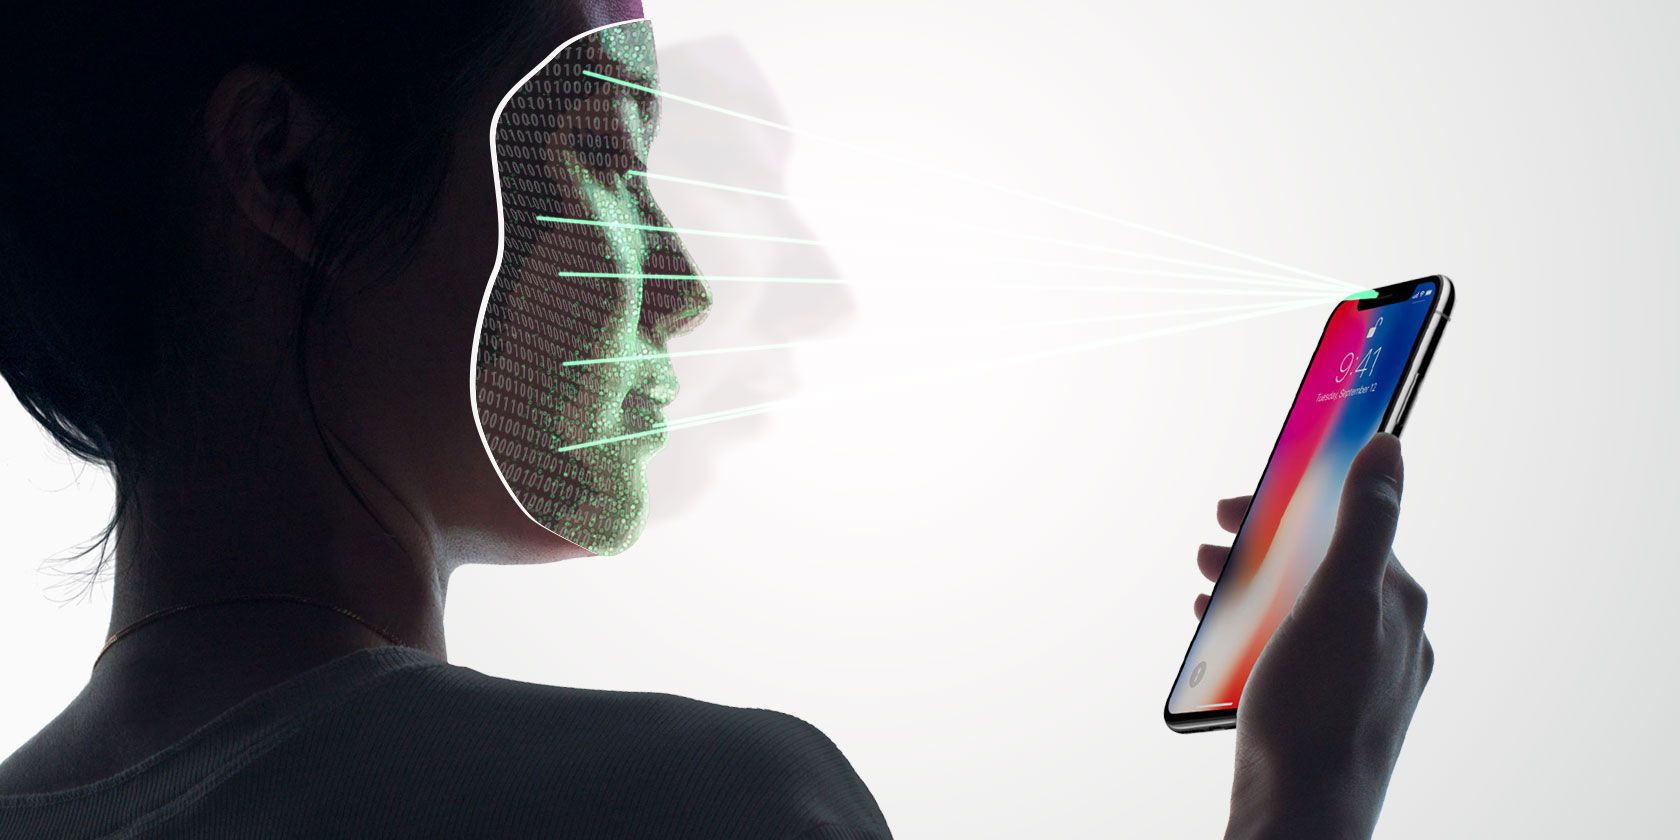 Buying an iPhone X? Face ID Might Make You Reconsider